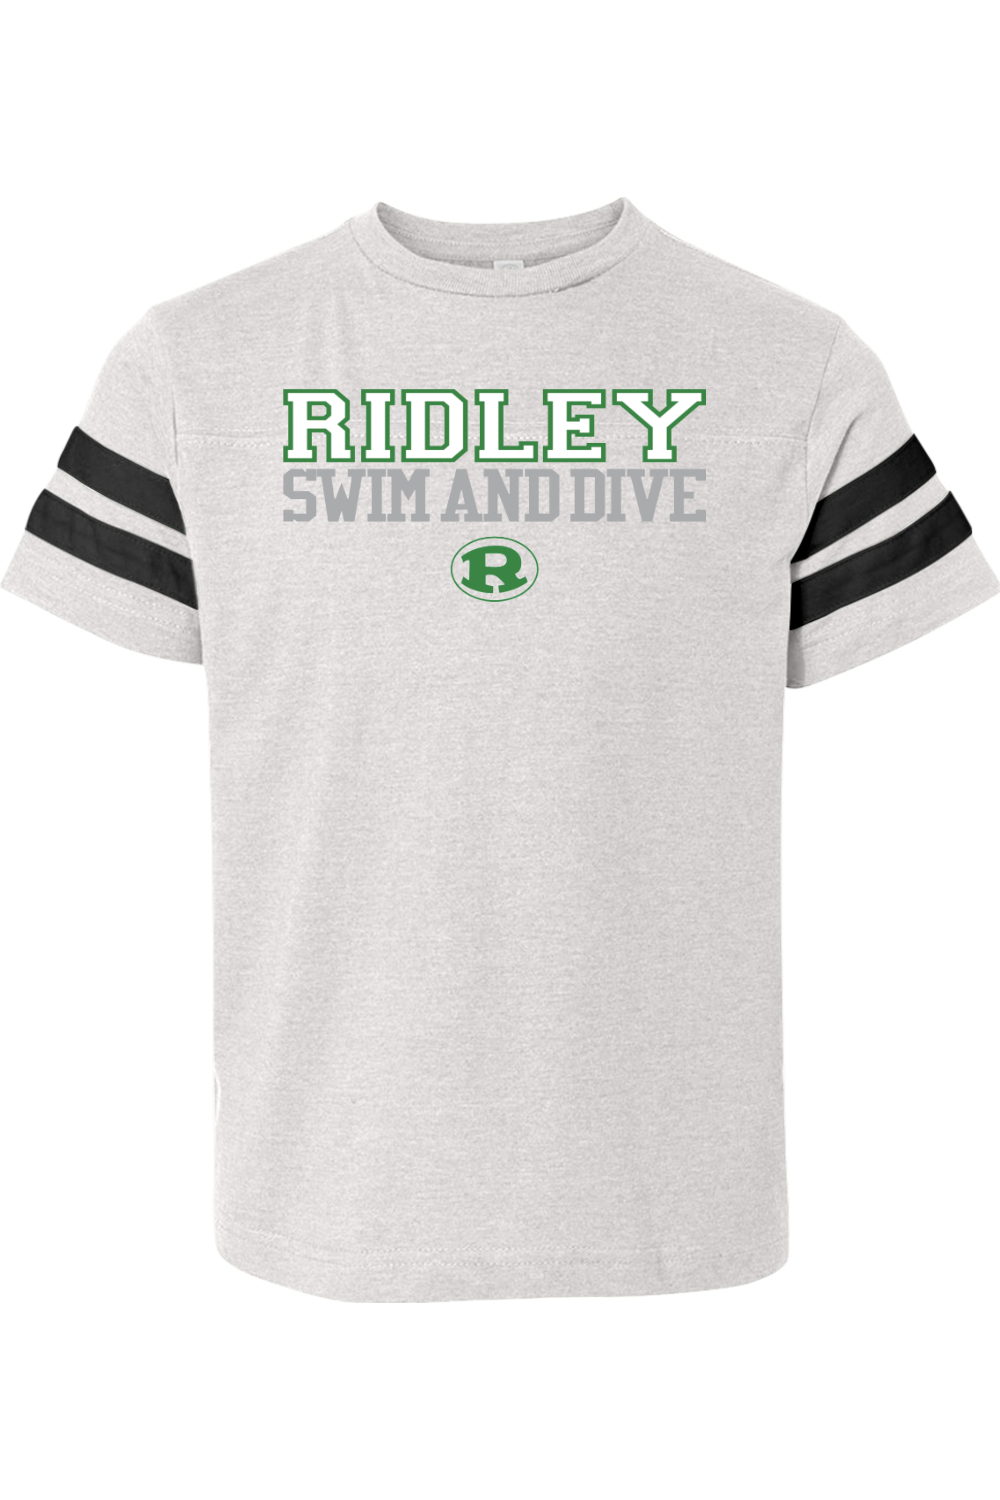 Ridley Swim and Dive Youth Jersey Tee